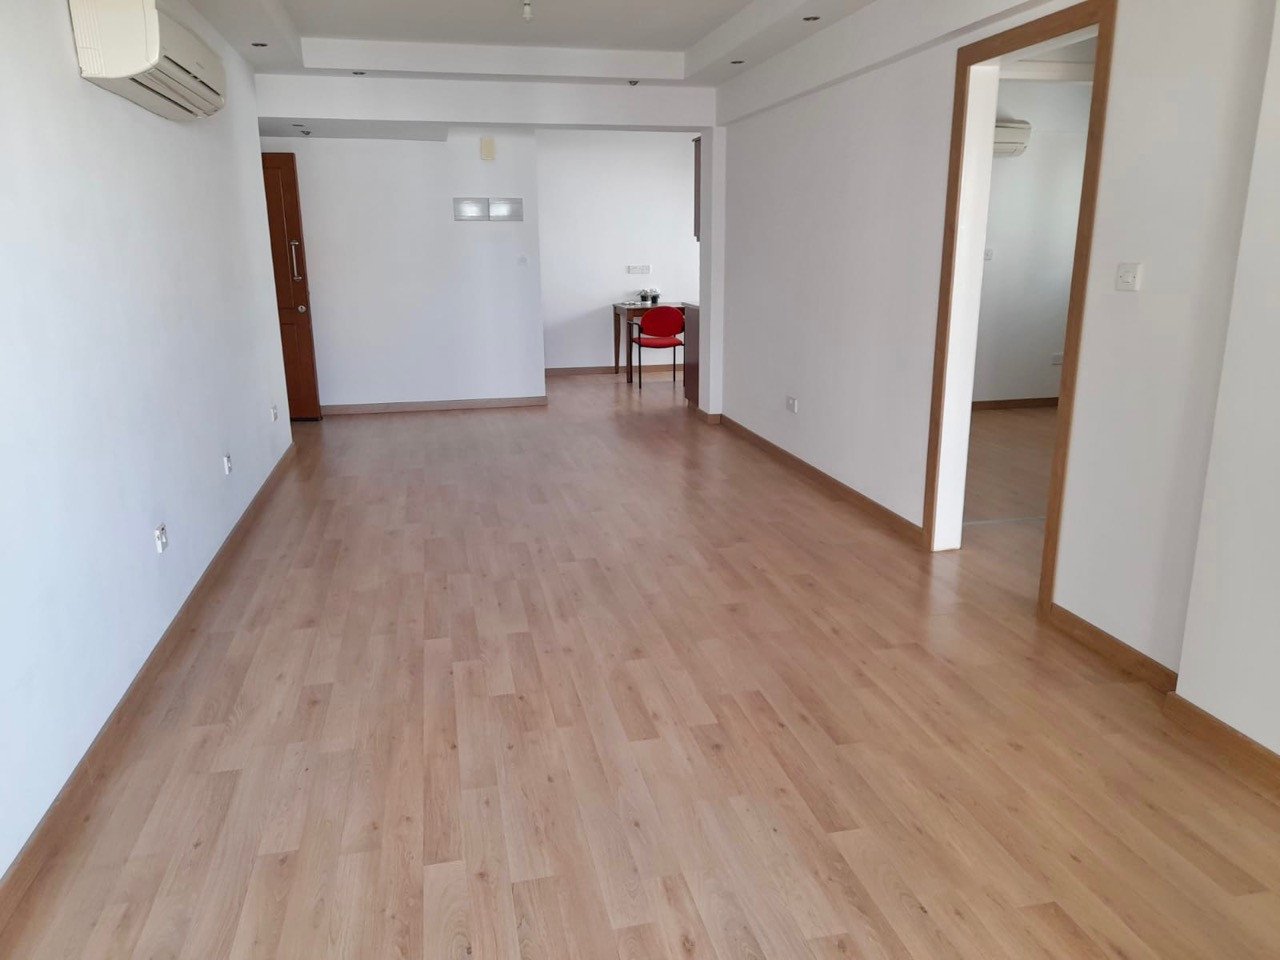 For Sale: Apartment (Flat) in Acropoli, Nicosia for Rent | Key Realtor Cyprus